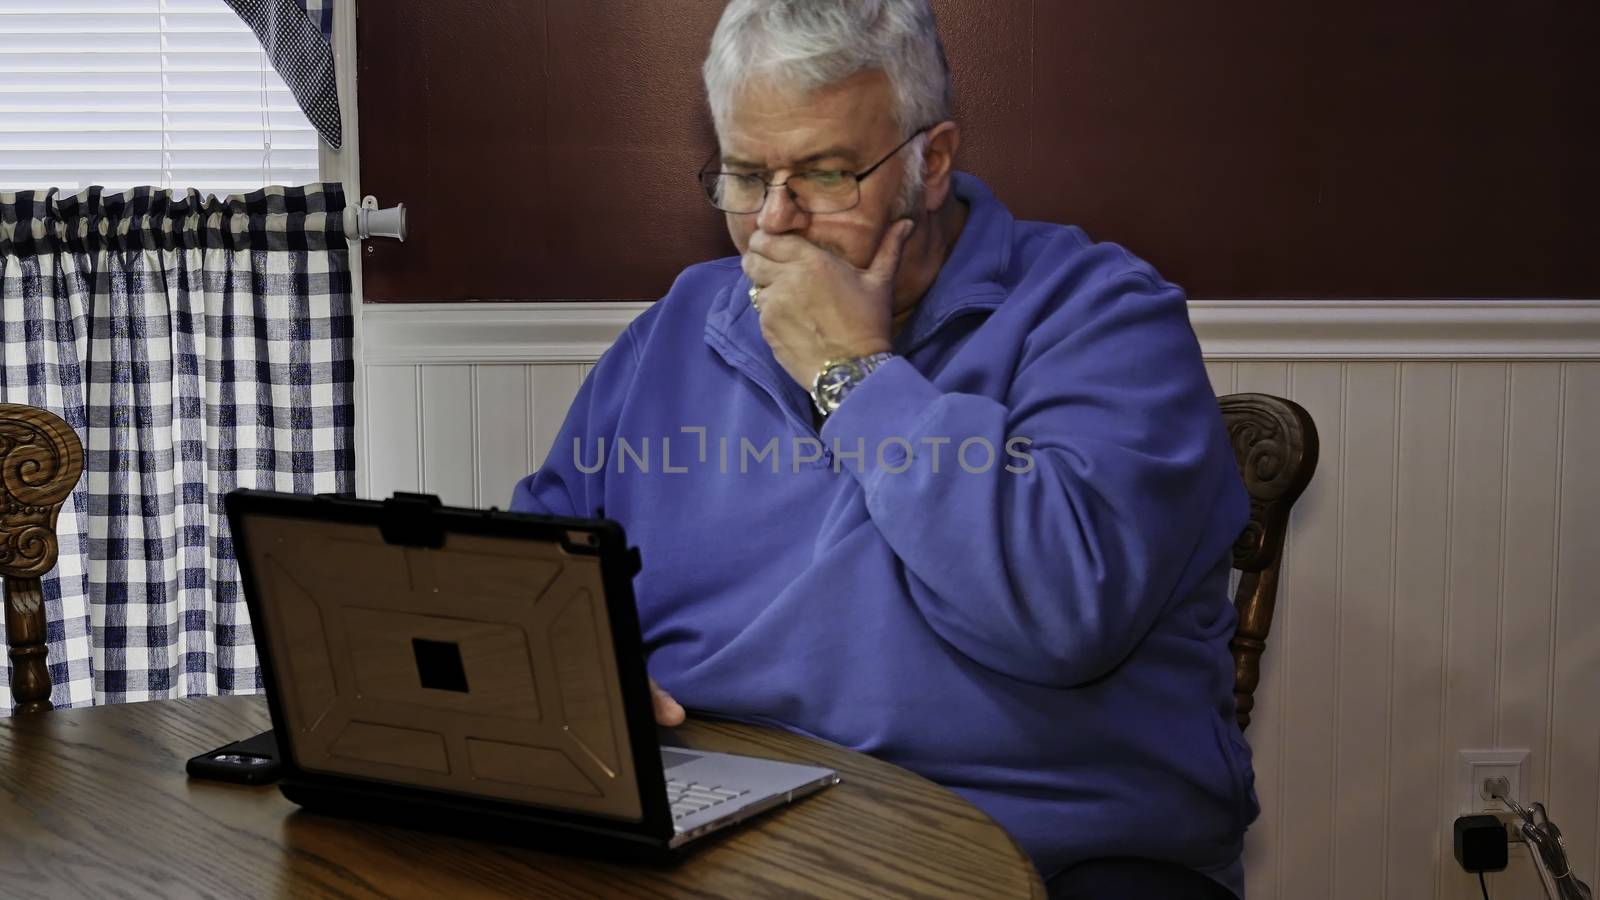 Senior Upset and Mad at Using a Computer and Technology by actionphoto50